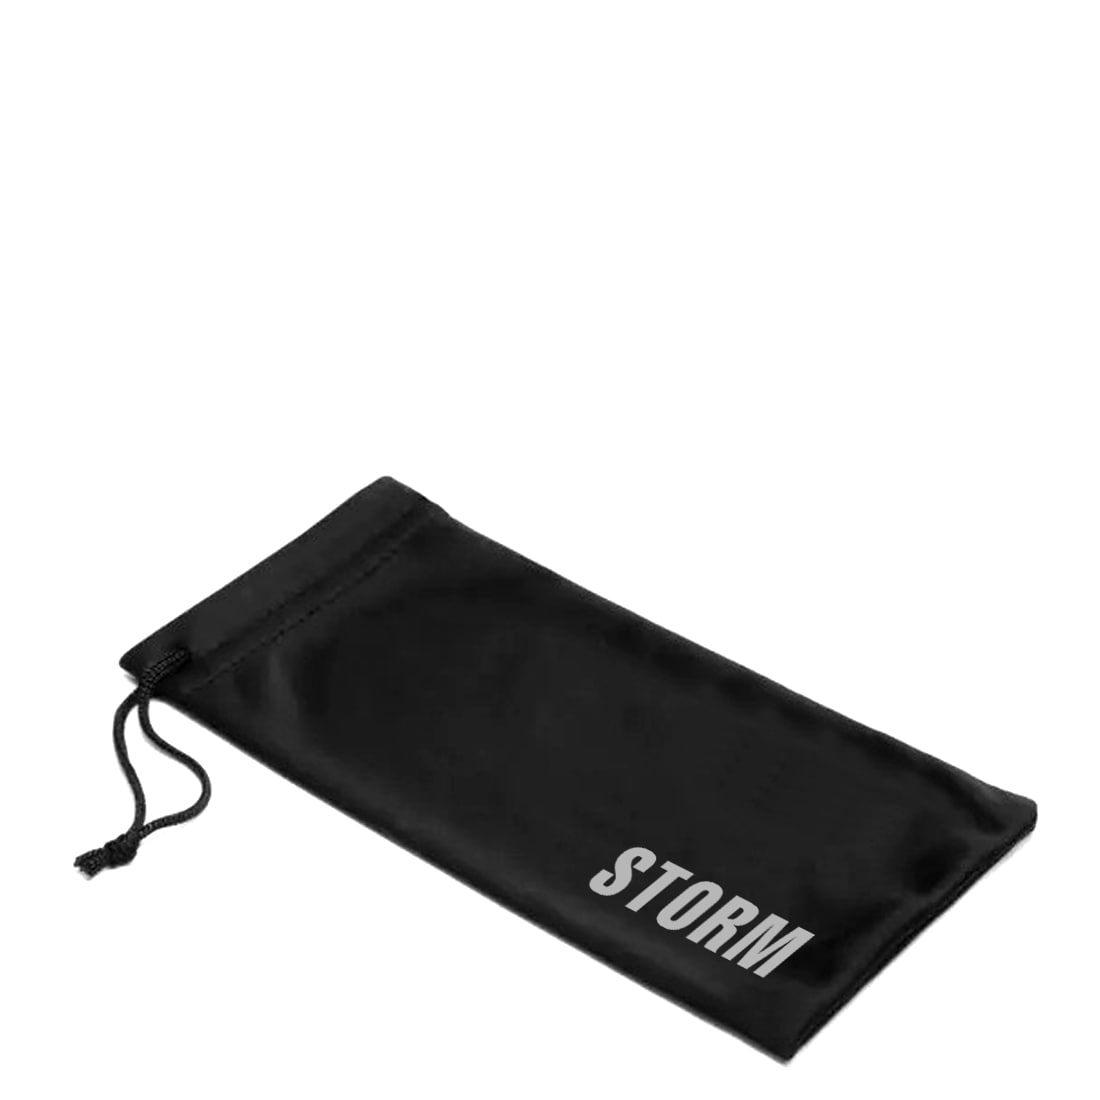 Supplied in a STORM branded black microfiber drawstring pouch 